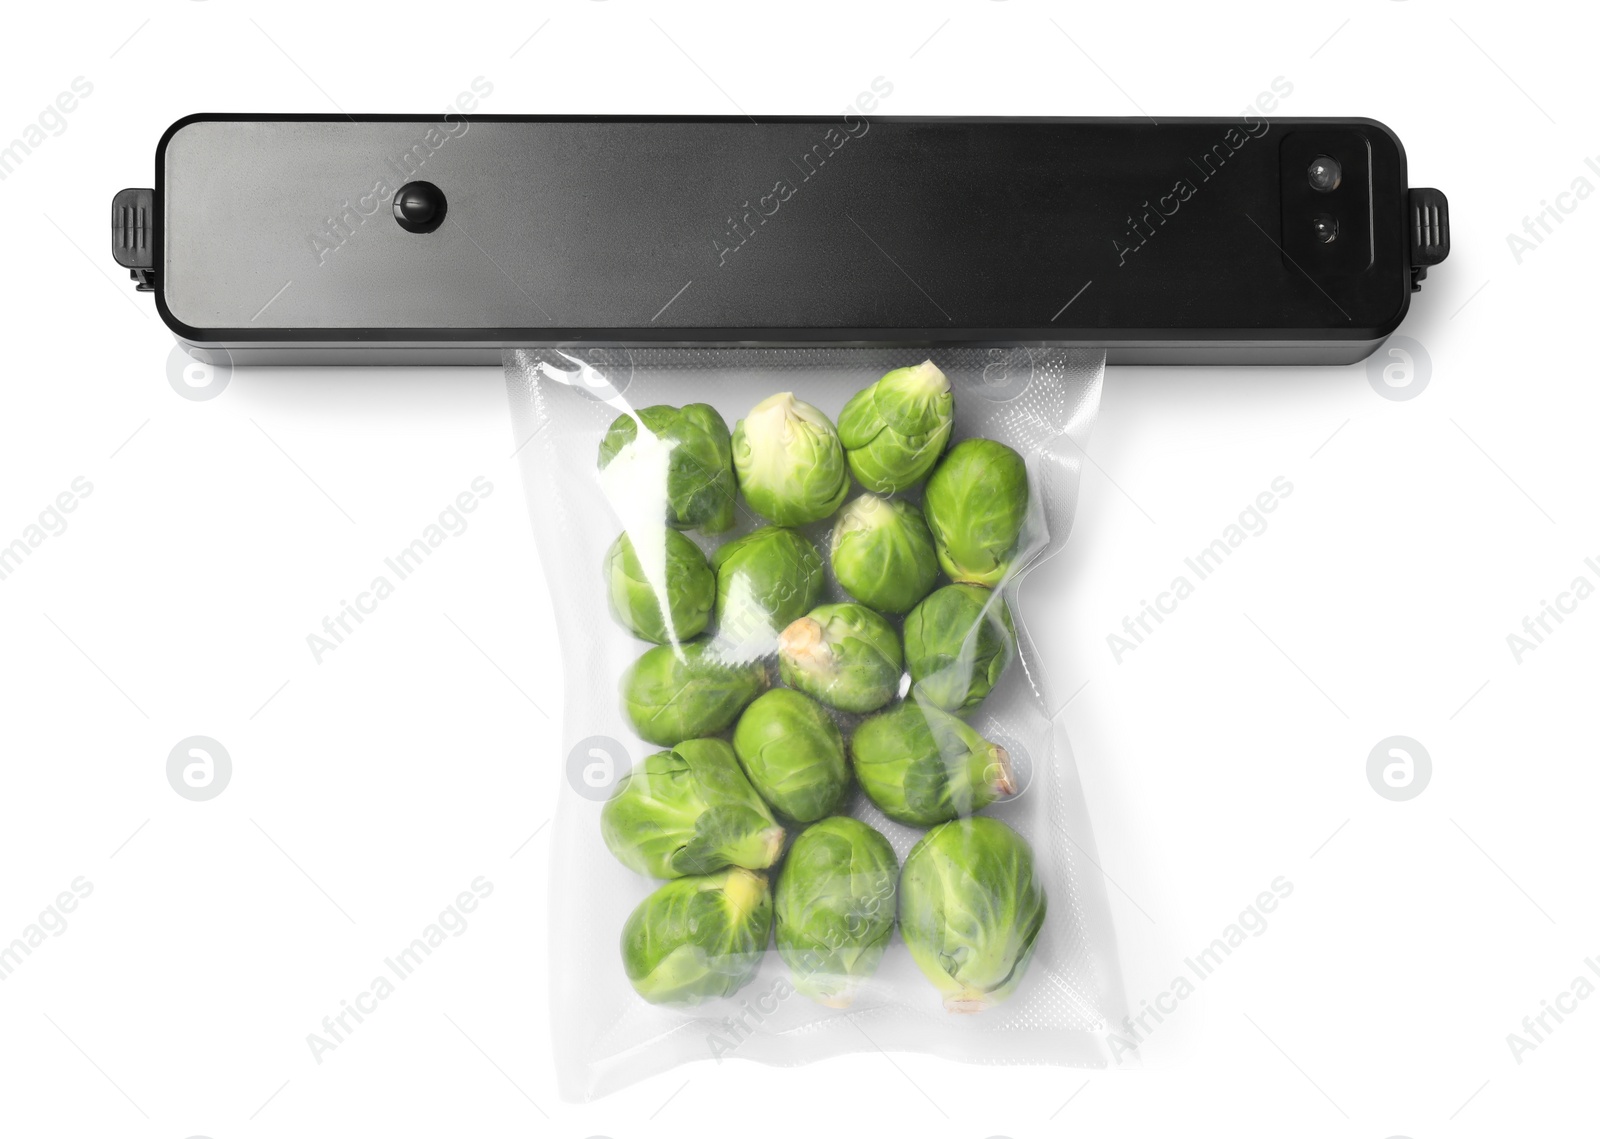 Photo of Sealer for vacuum packing and plastic bag with Brussels sprouts on white background, top view